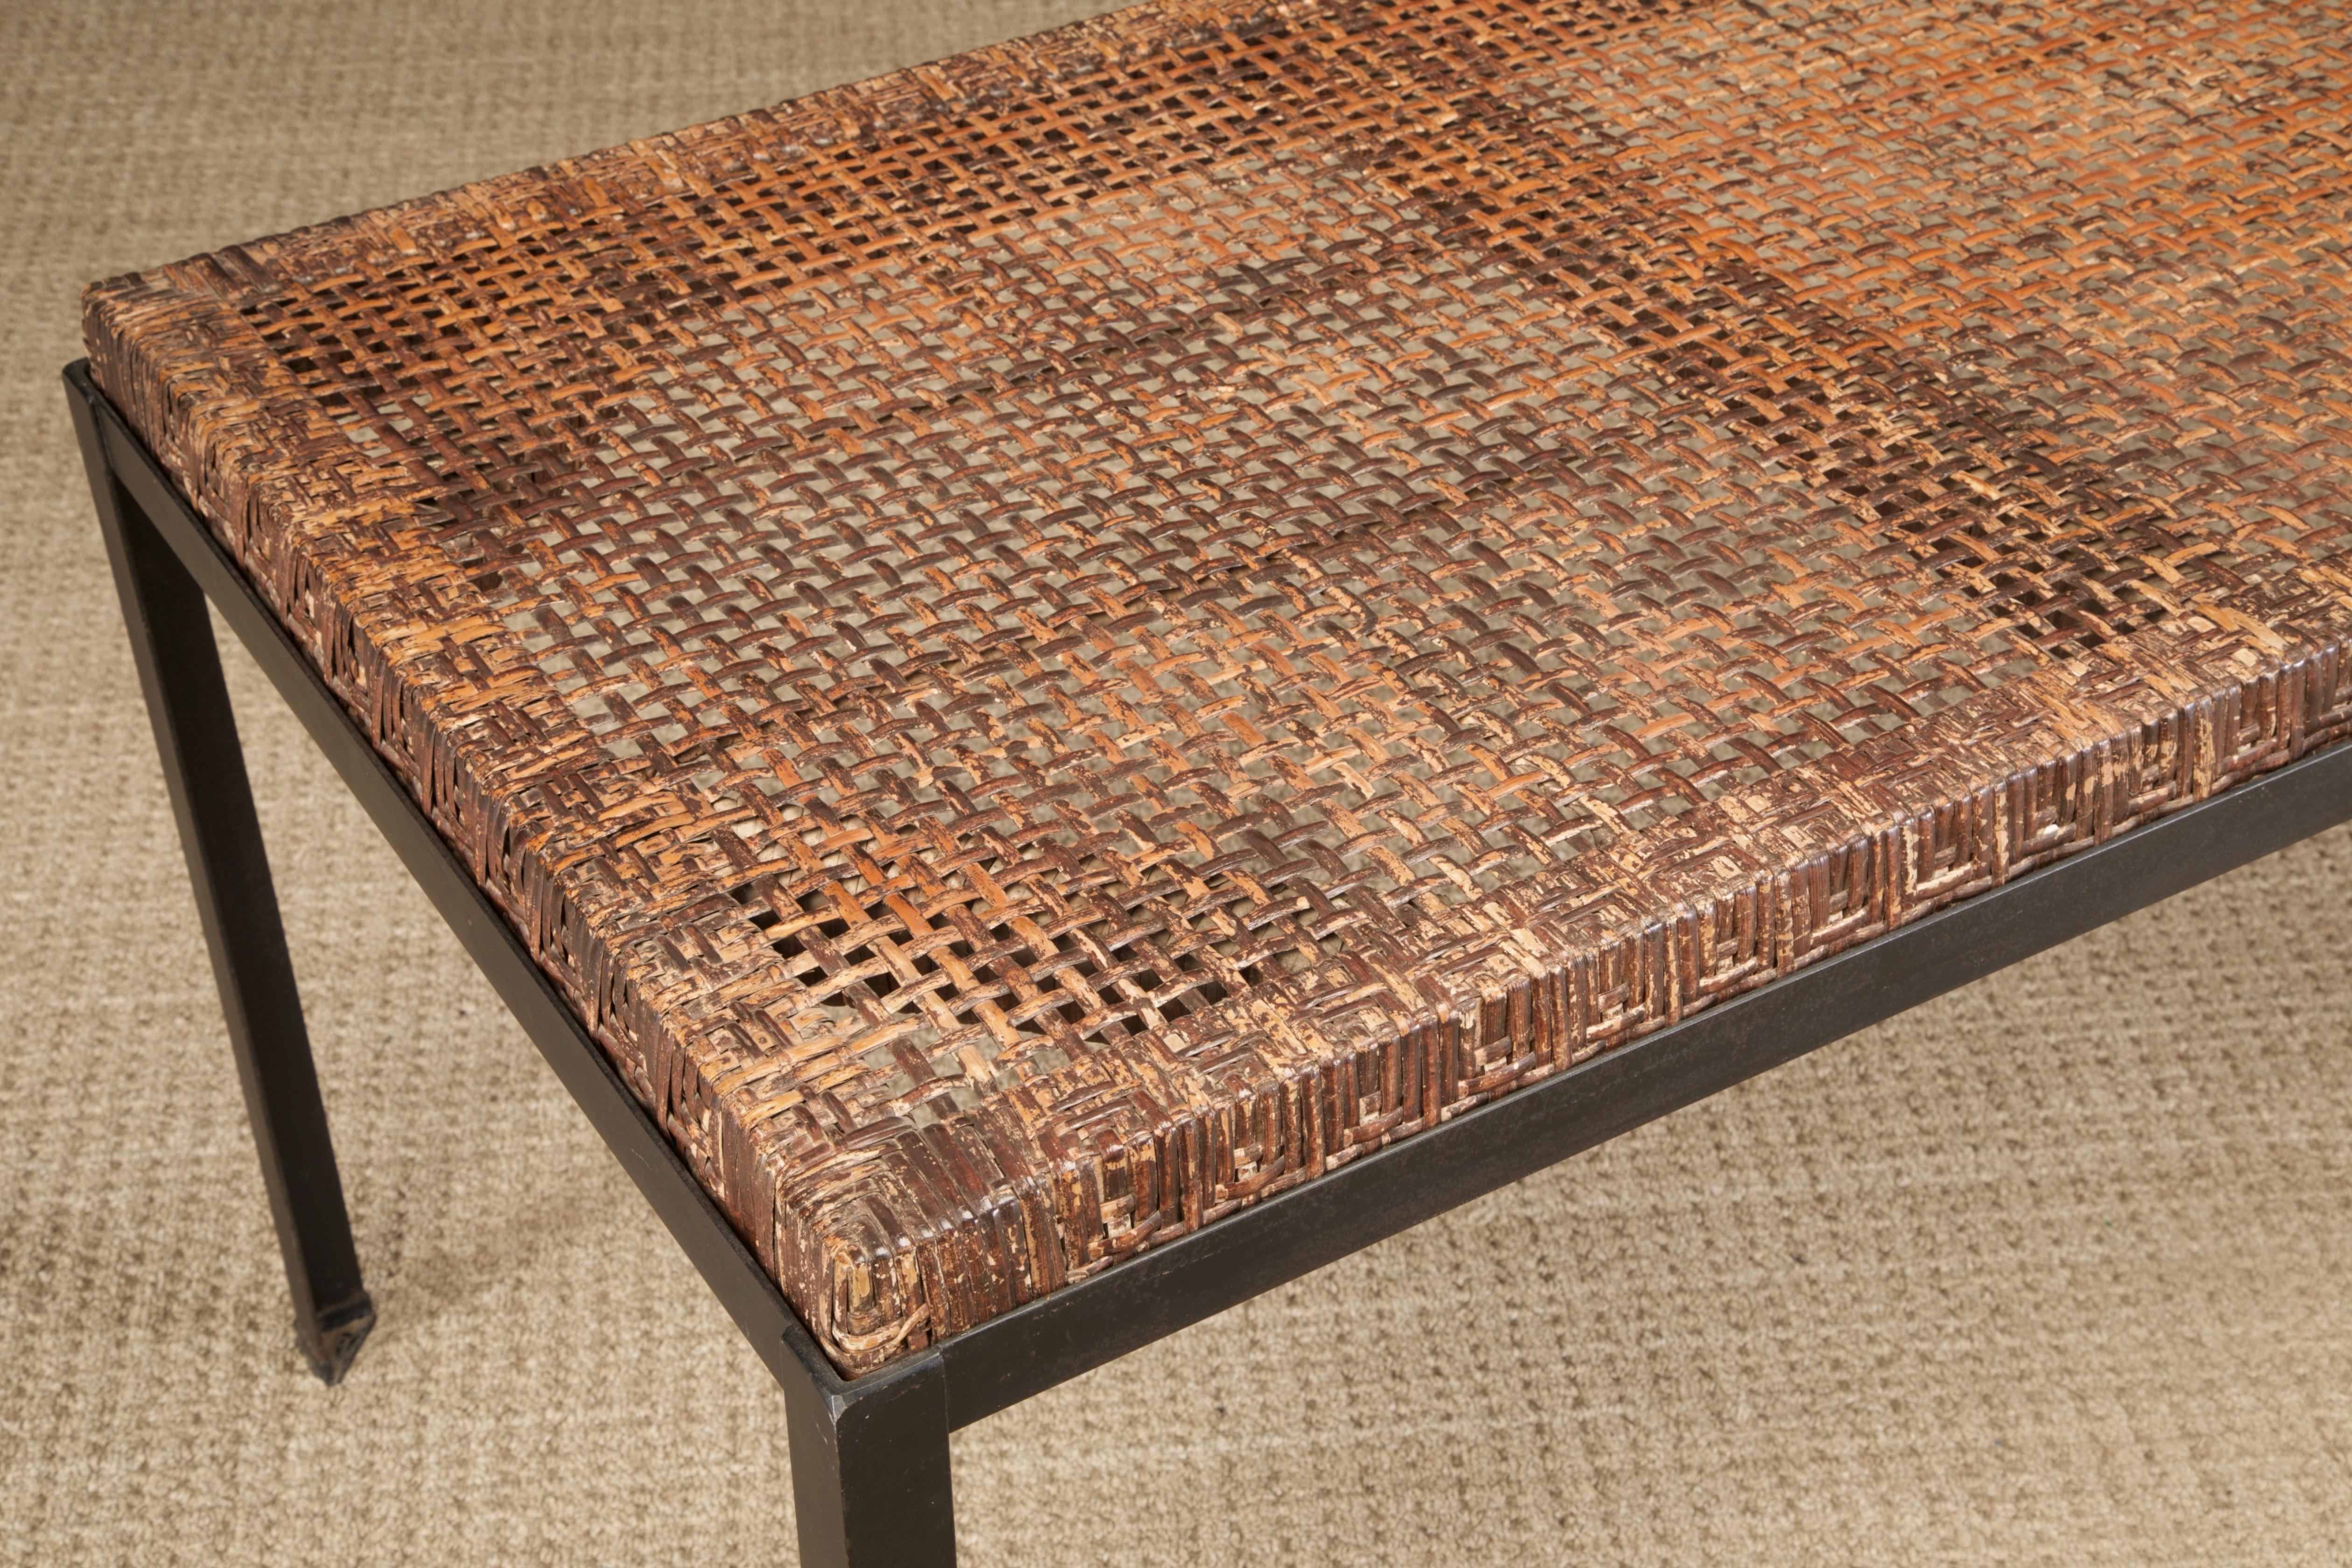 Caned Dining Table by Danny Ho Fong for Tropi-cal in Iron and Rattan, c 1960s For Sale 9